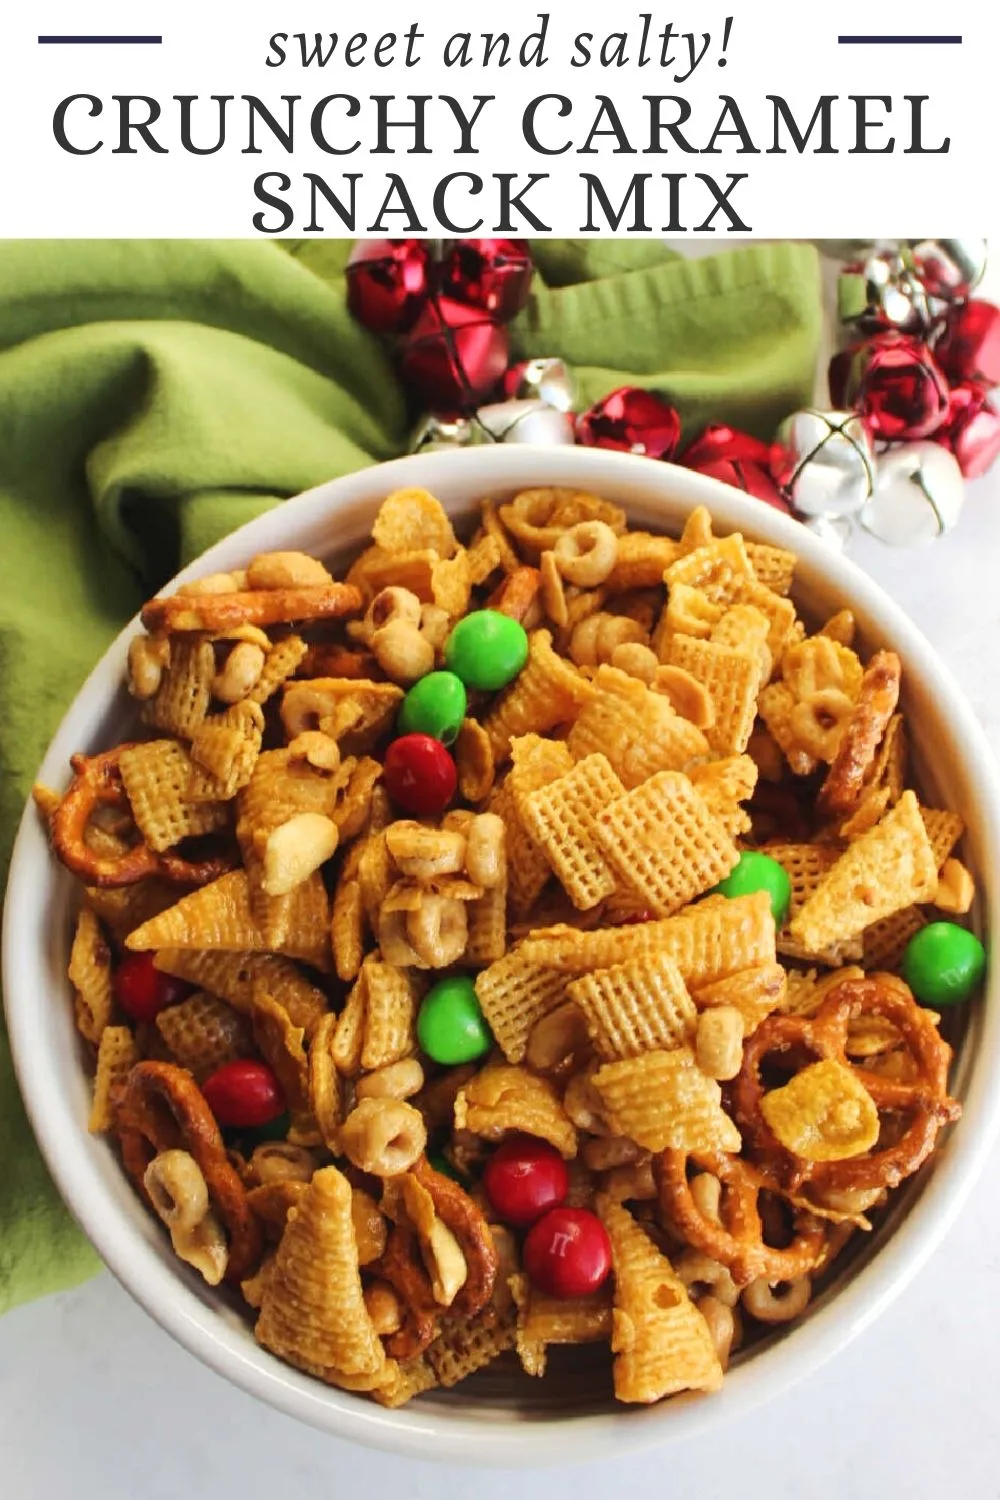 This caramel snack mix has it all. It is sweet and salty, crunchy and delicious. Plus it can easily be customized to what you have on hand or your tastes!